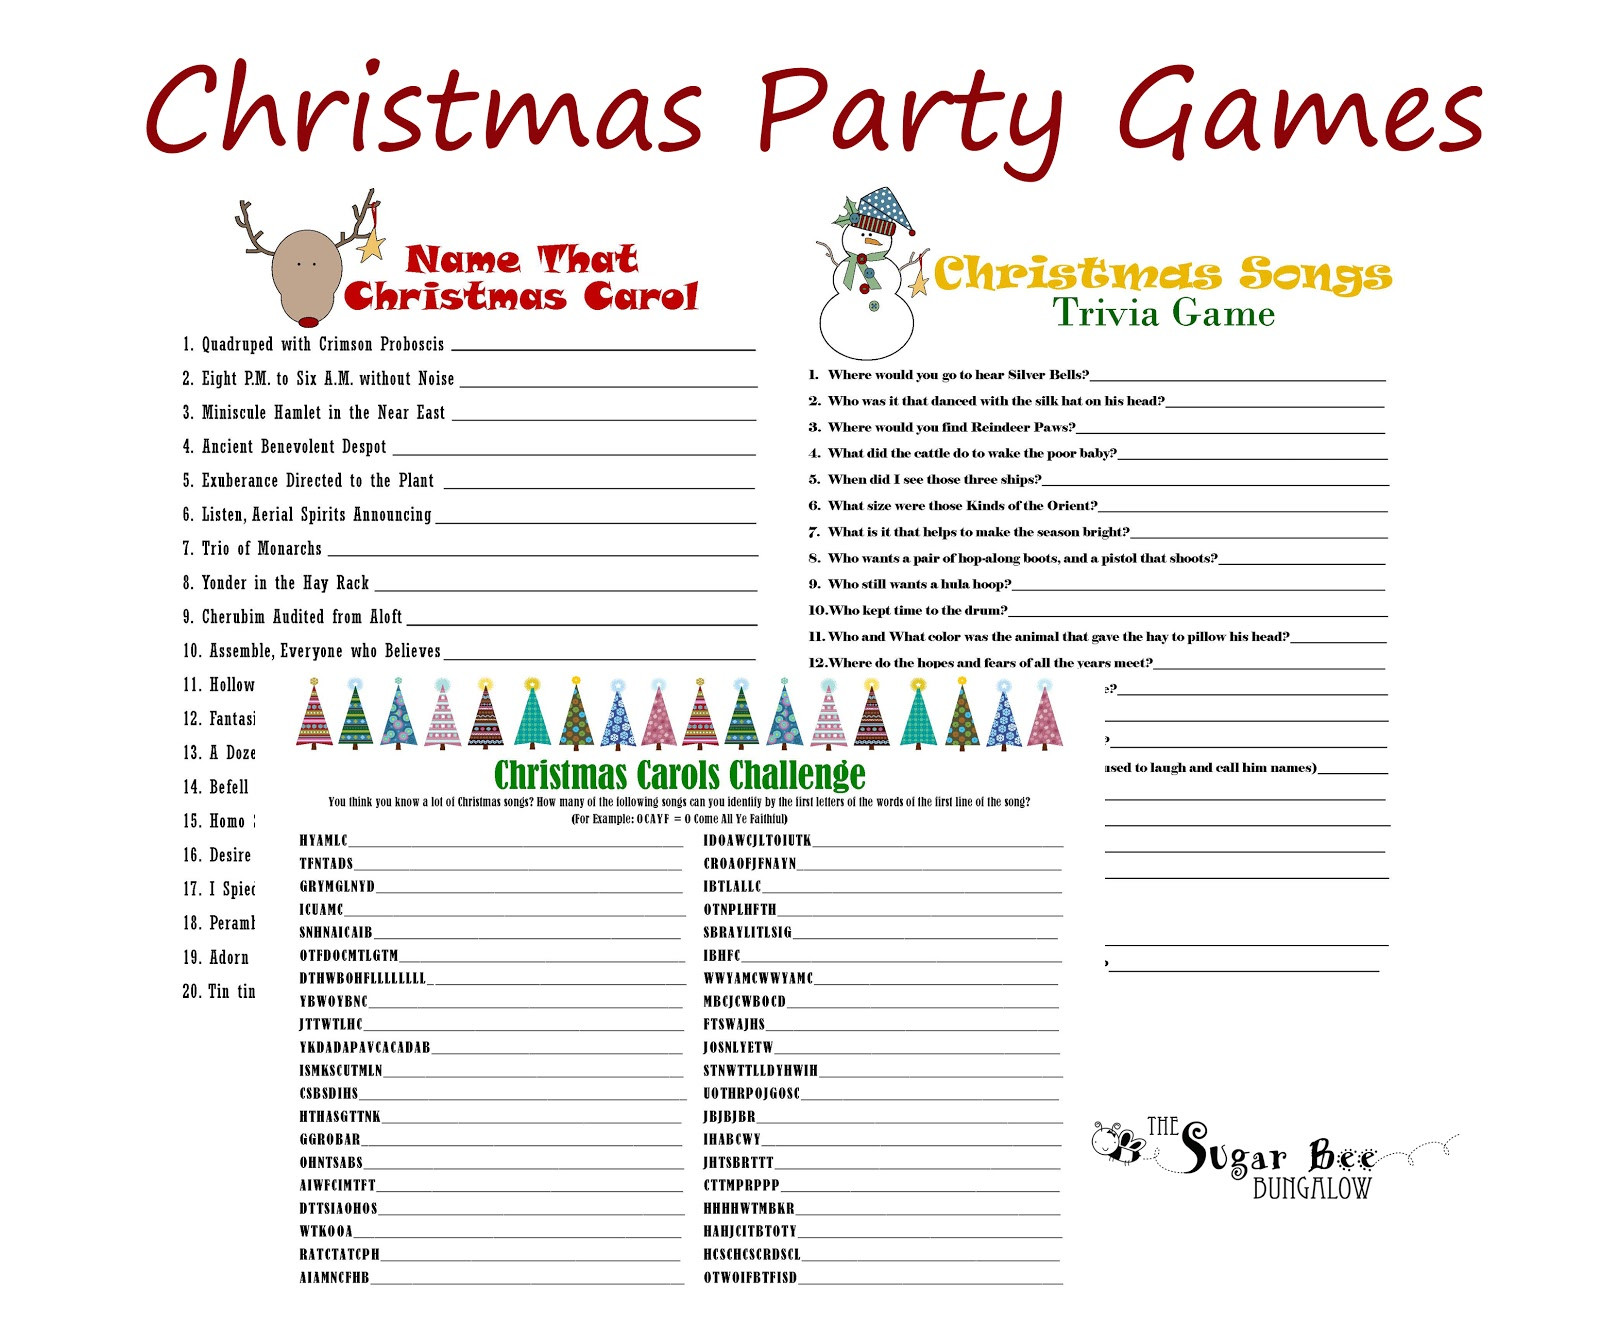 Enjoyable Office Christmas Party Games Ideas
 Funny Christmas Party Game Ideas